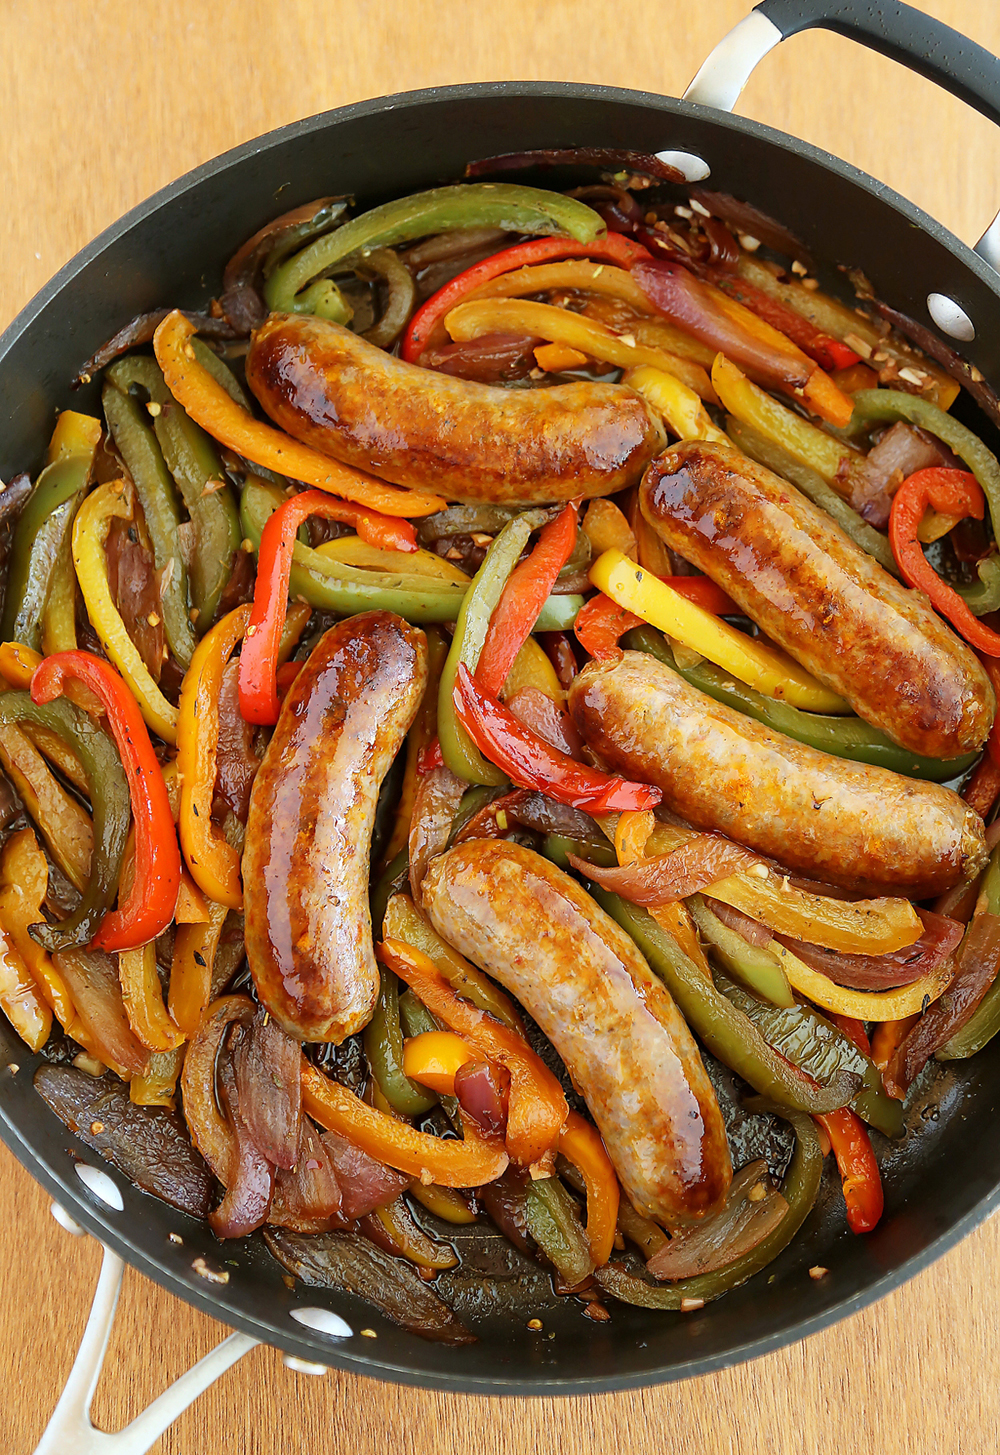 Skillet Italian Sausage Peppers 6 